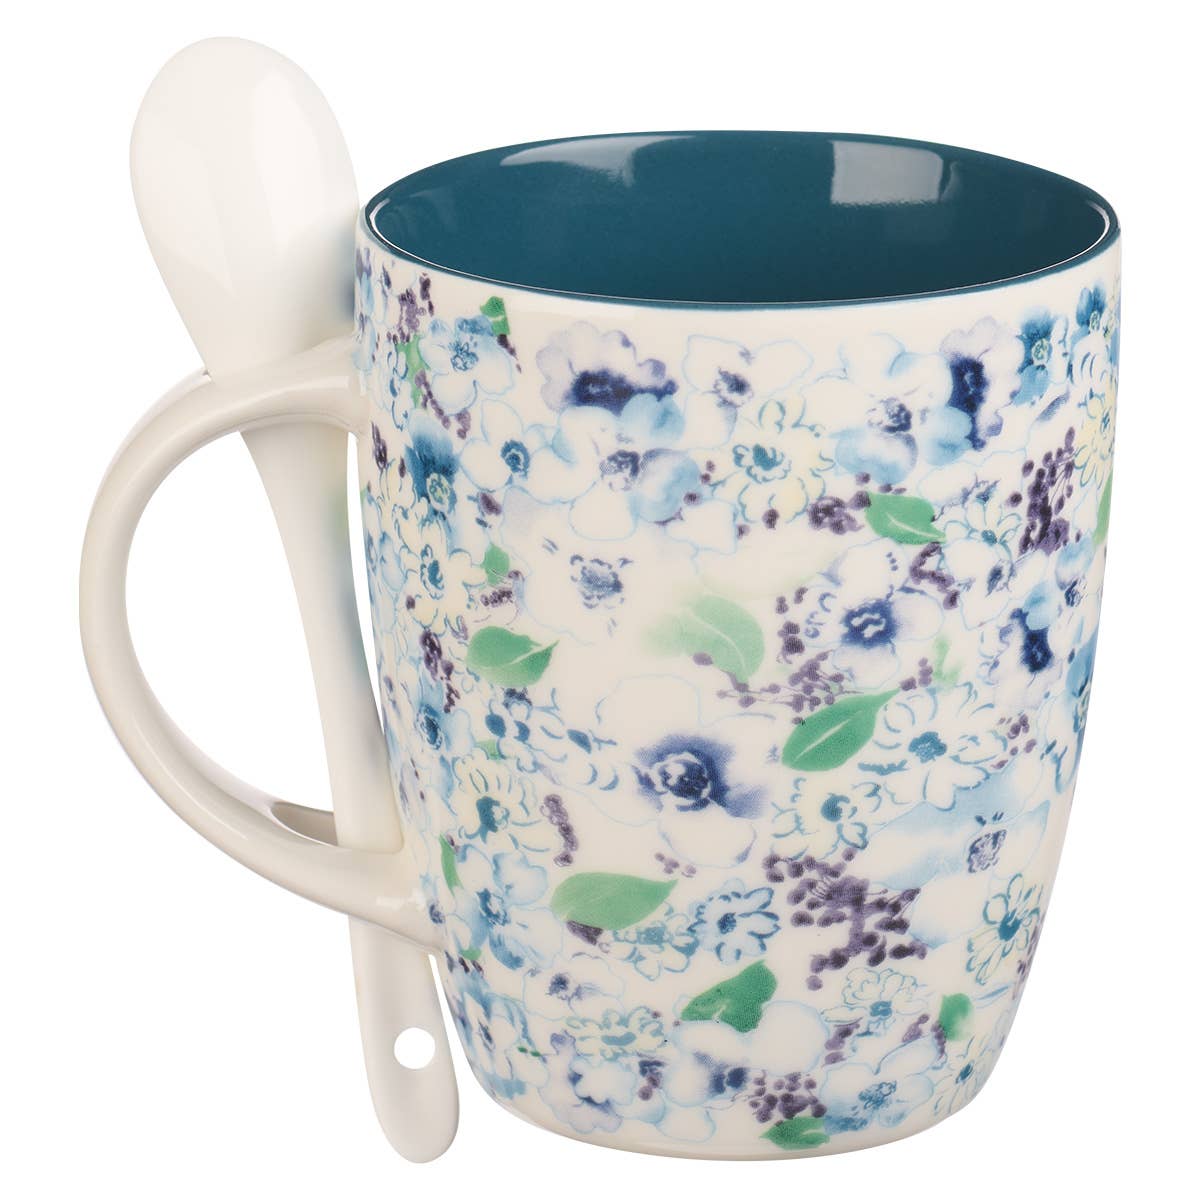 Saved by Grace Blue Floral Ceramic Coffee Mug with Spoon - E